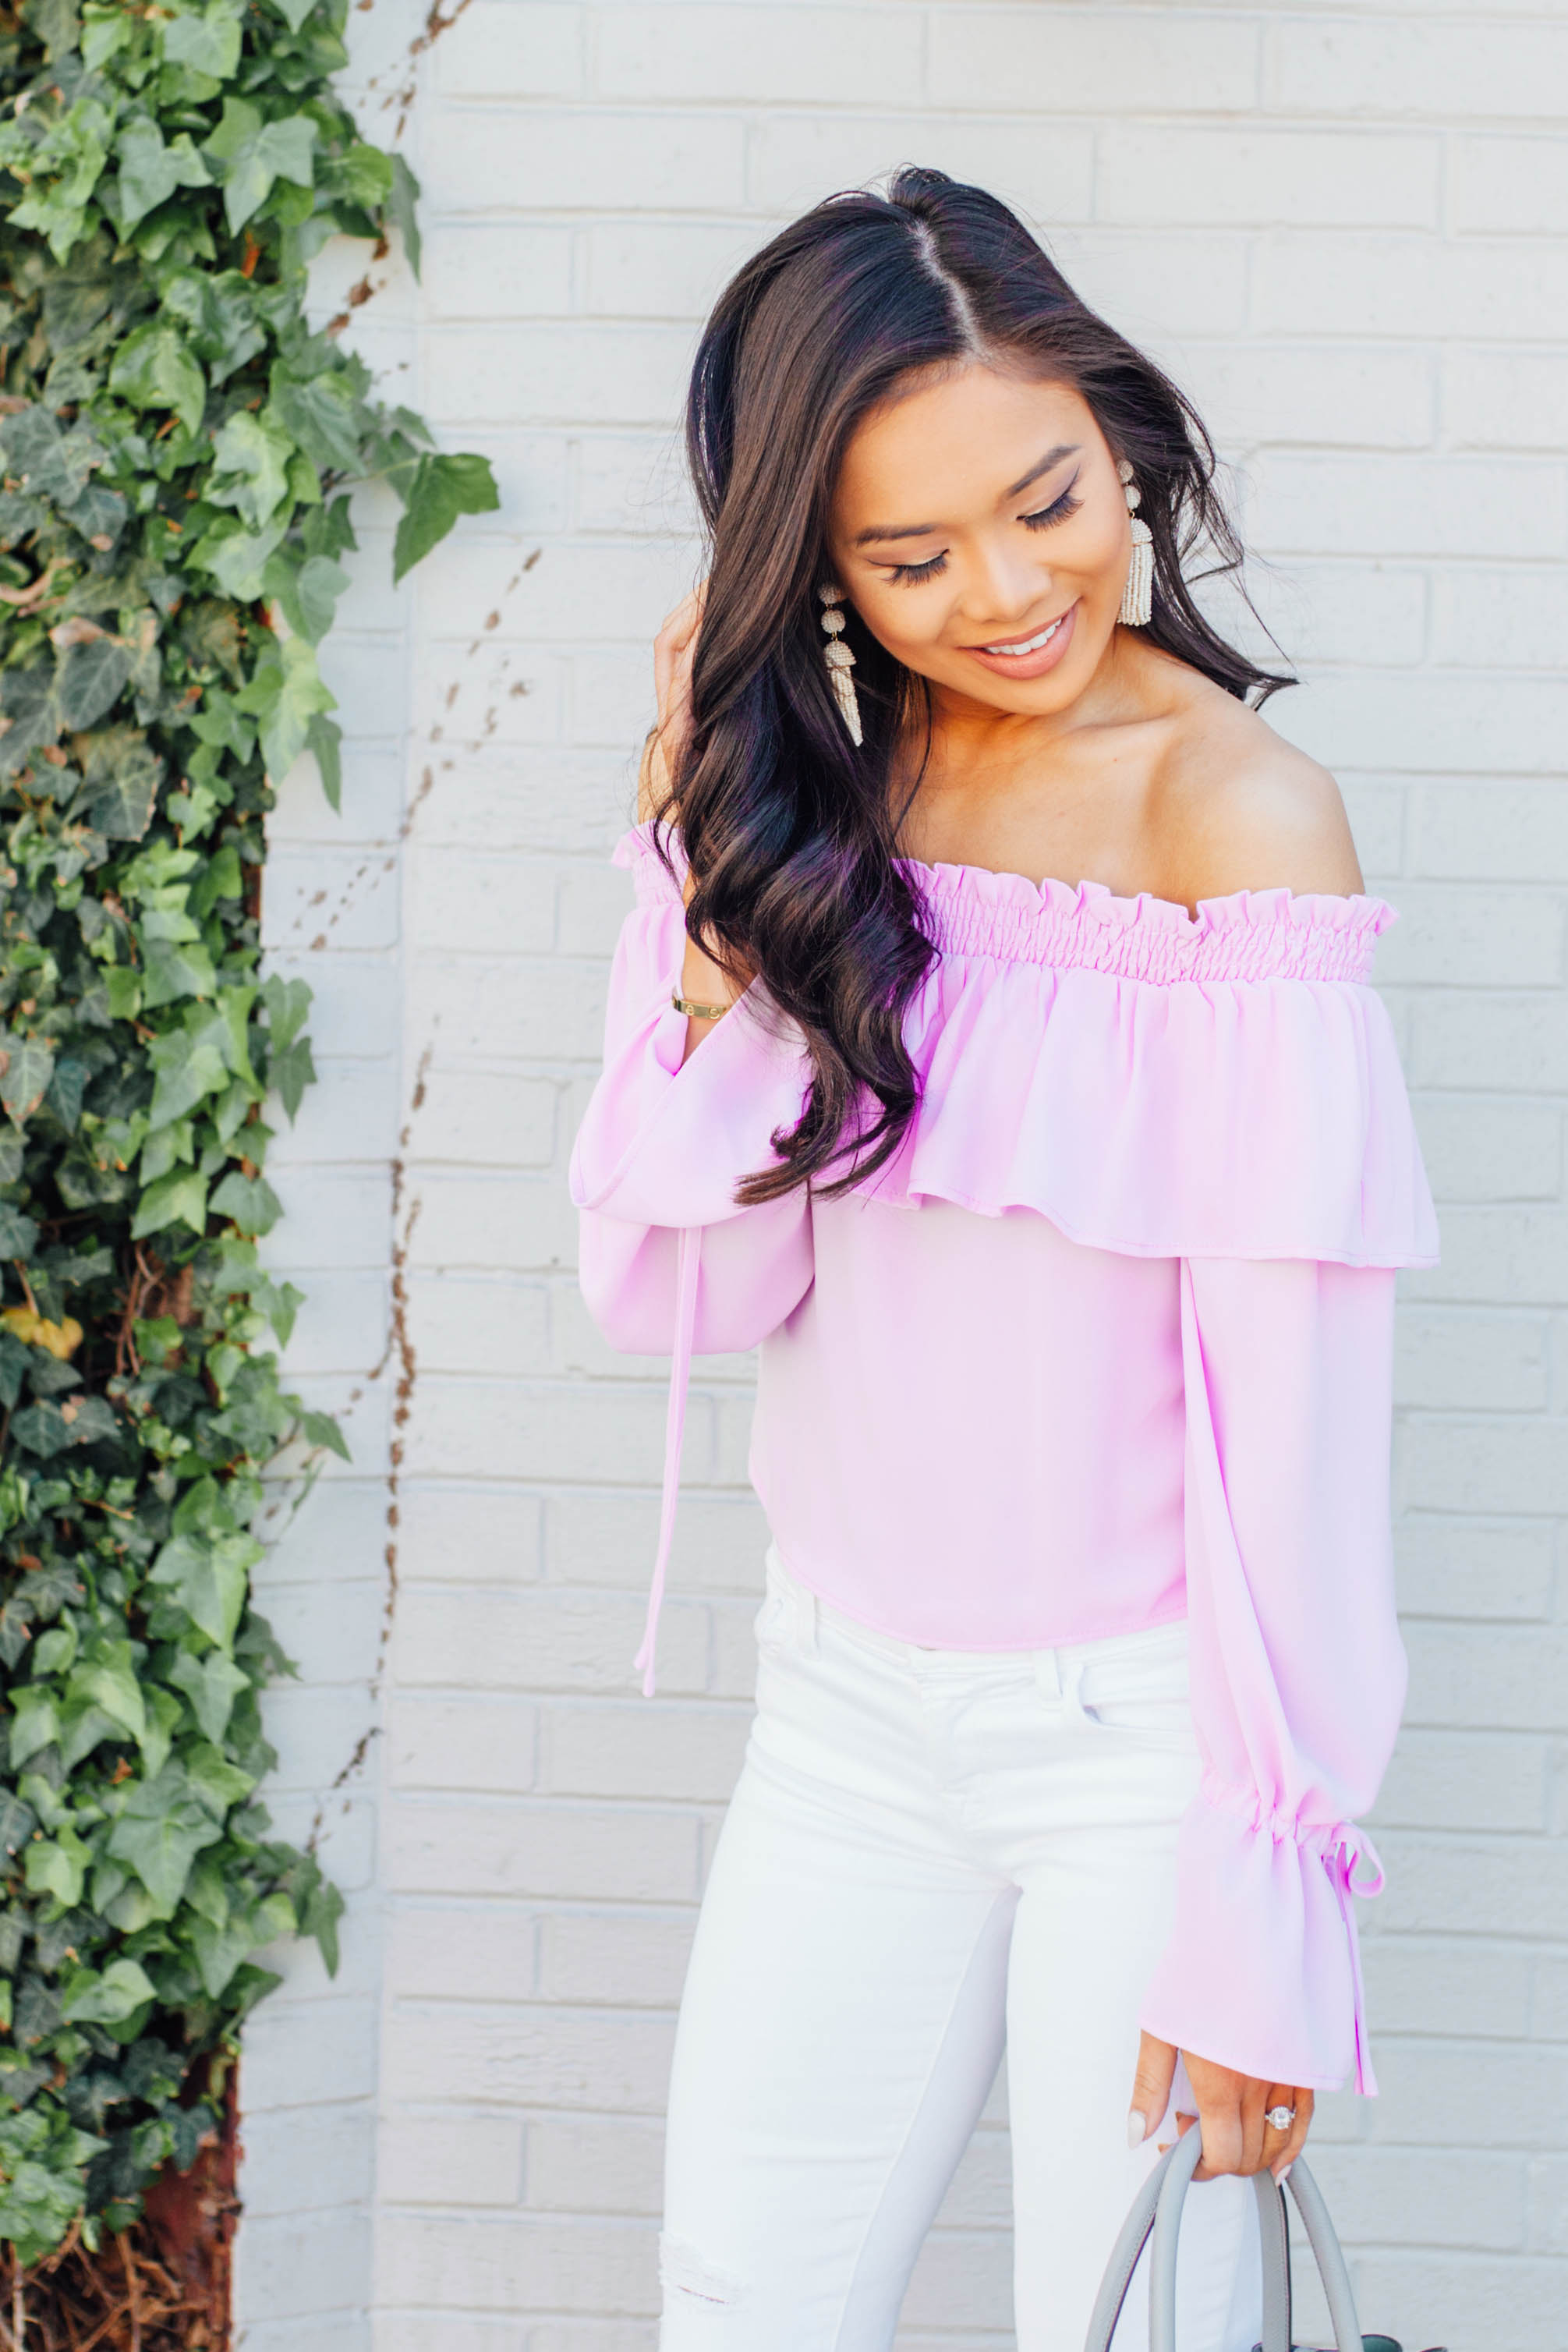 Hoang-Kim wears a lavender off-the-shoulder top with white jeans and wedges for spring